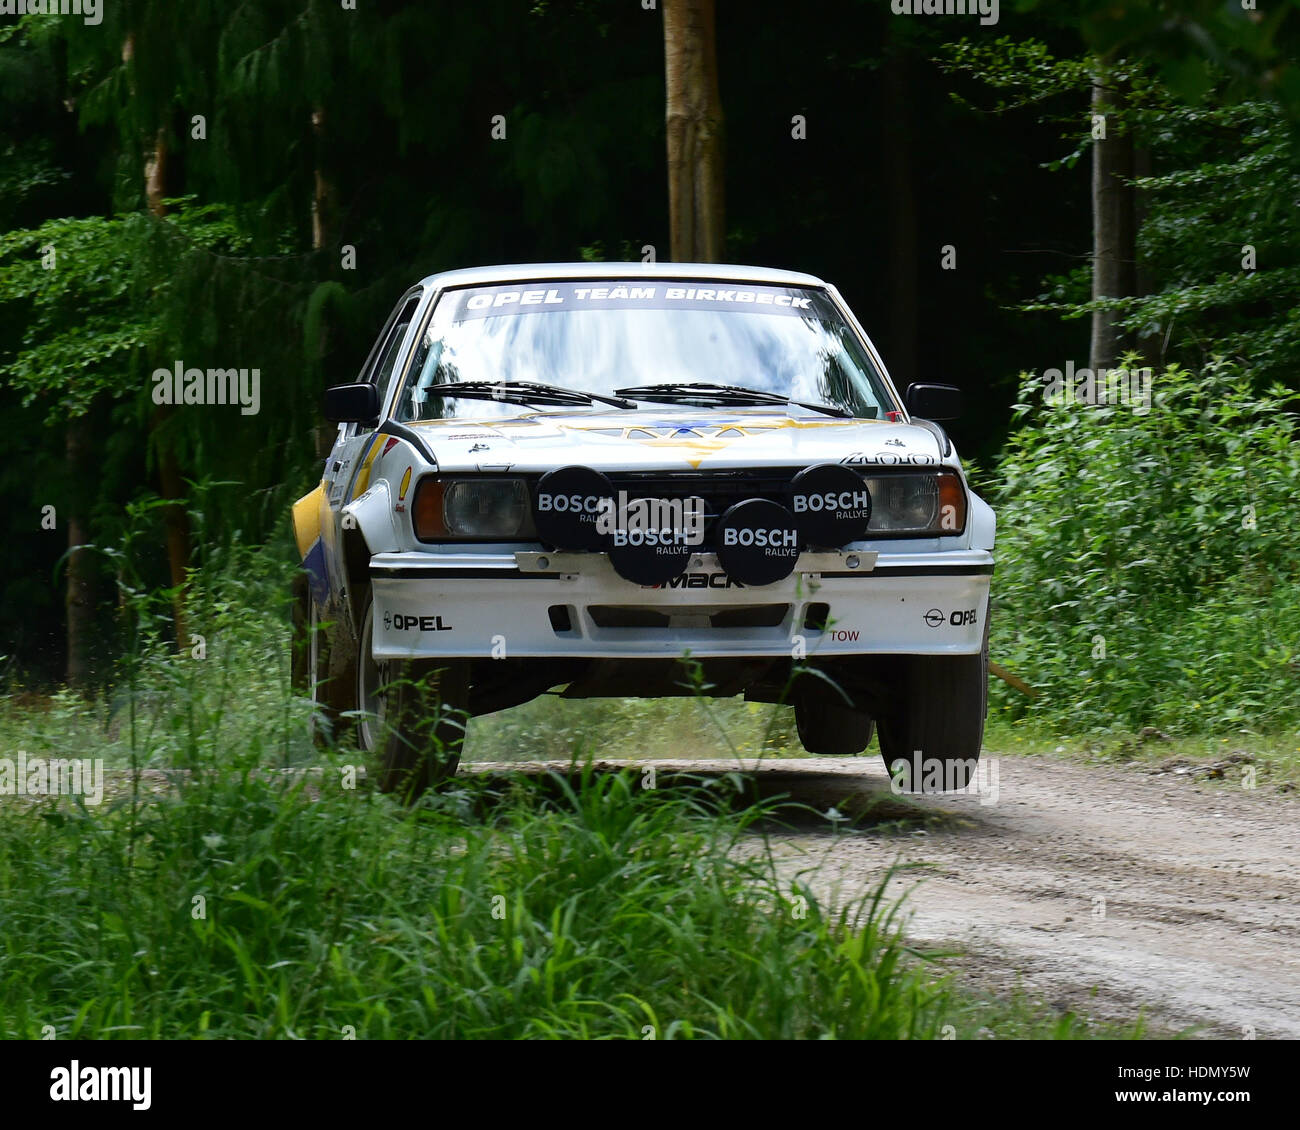 Jason Lepley, Opel Ascona 400, Forest Rally, Goodwood Festival of Speed 2016. les automobiles, voitures, animation, Festival of Speed, Forest rally Banque D'Images